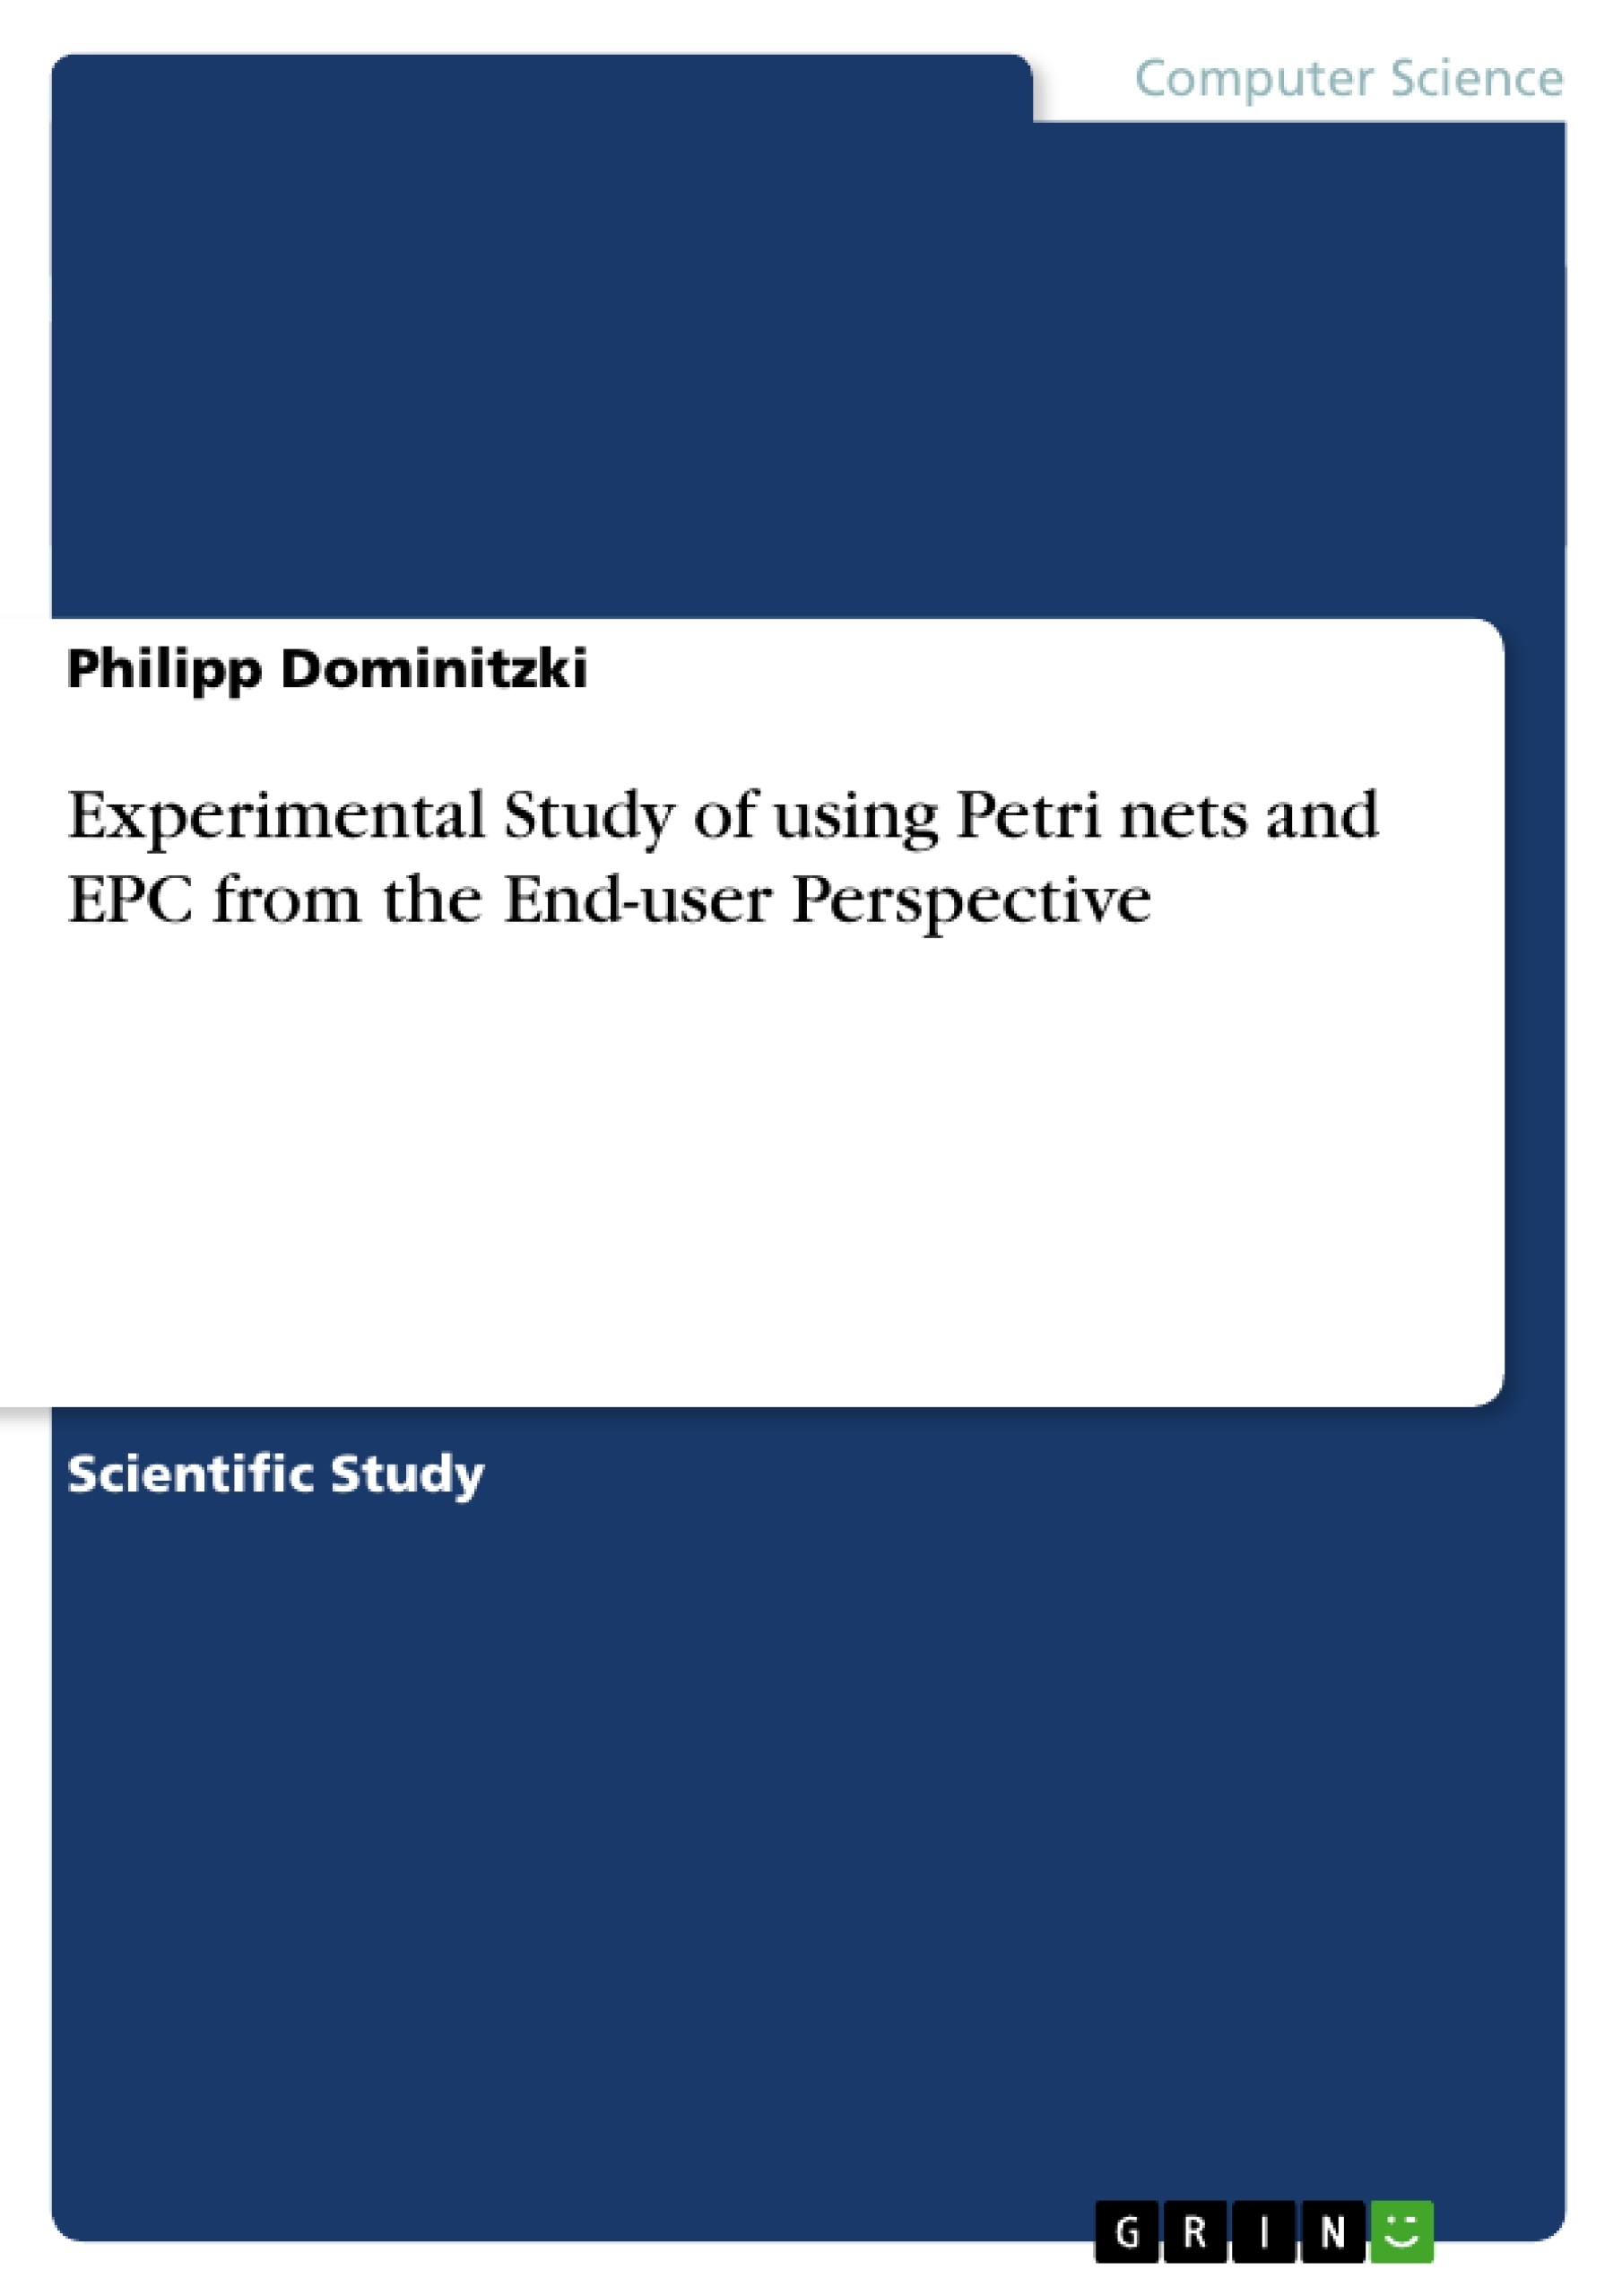 Title: Experimental Study of using Petri nets and EPC from the End-user Perspective